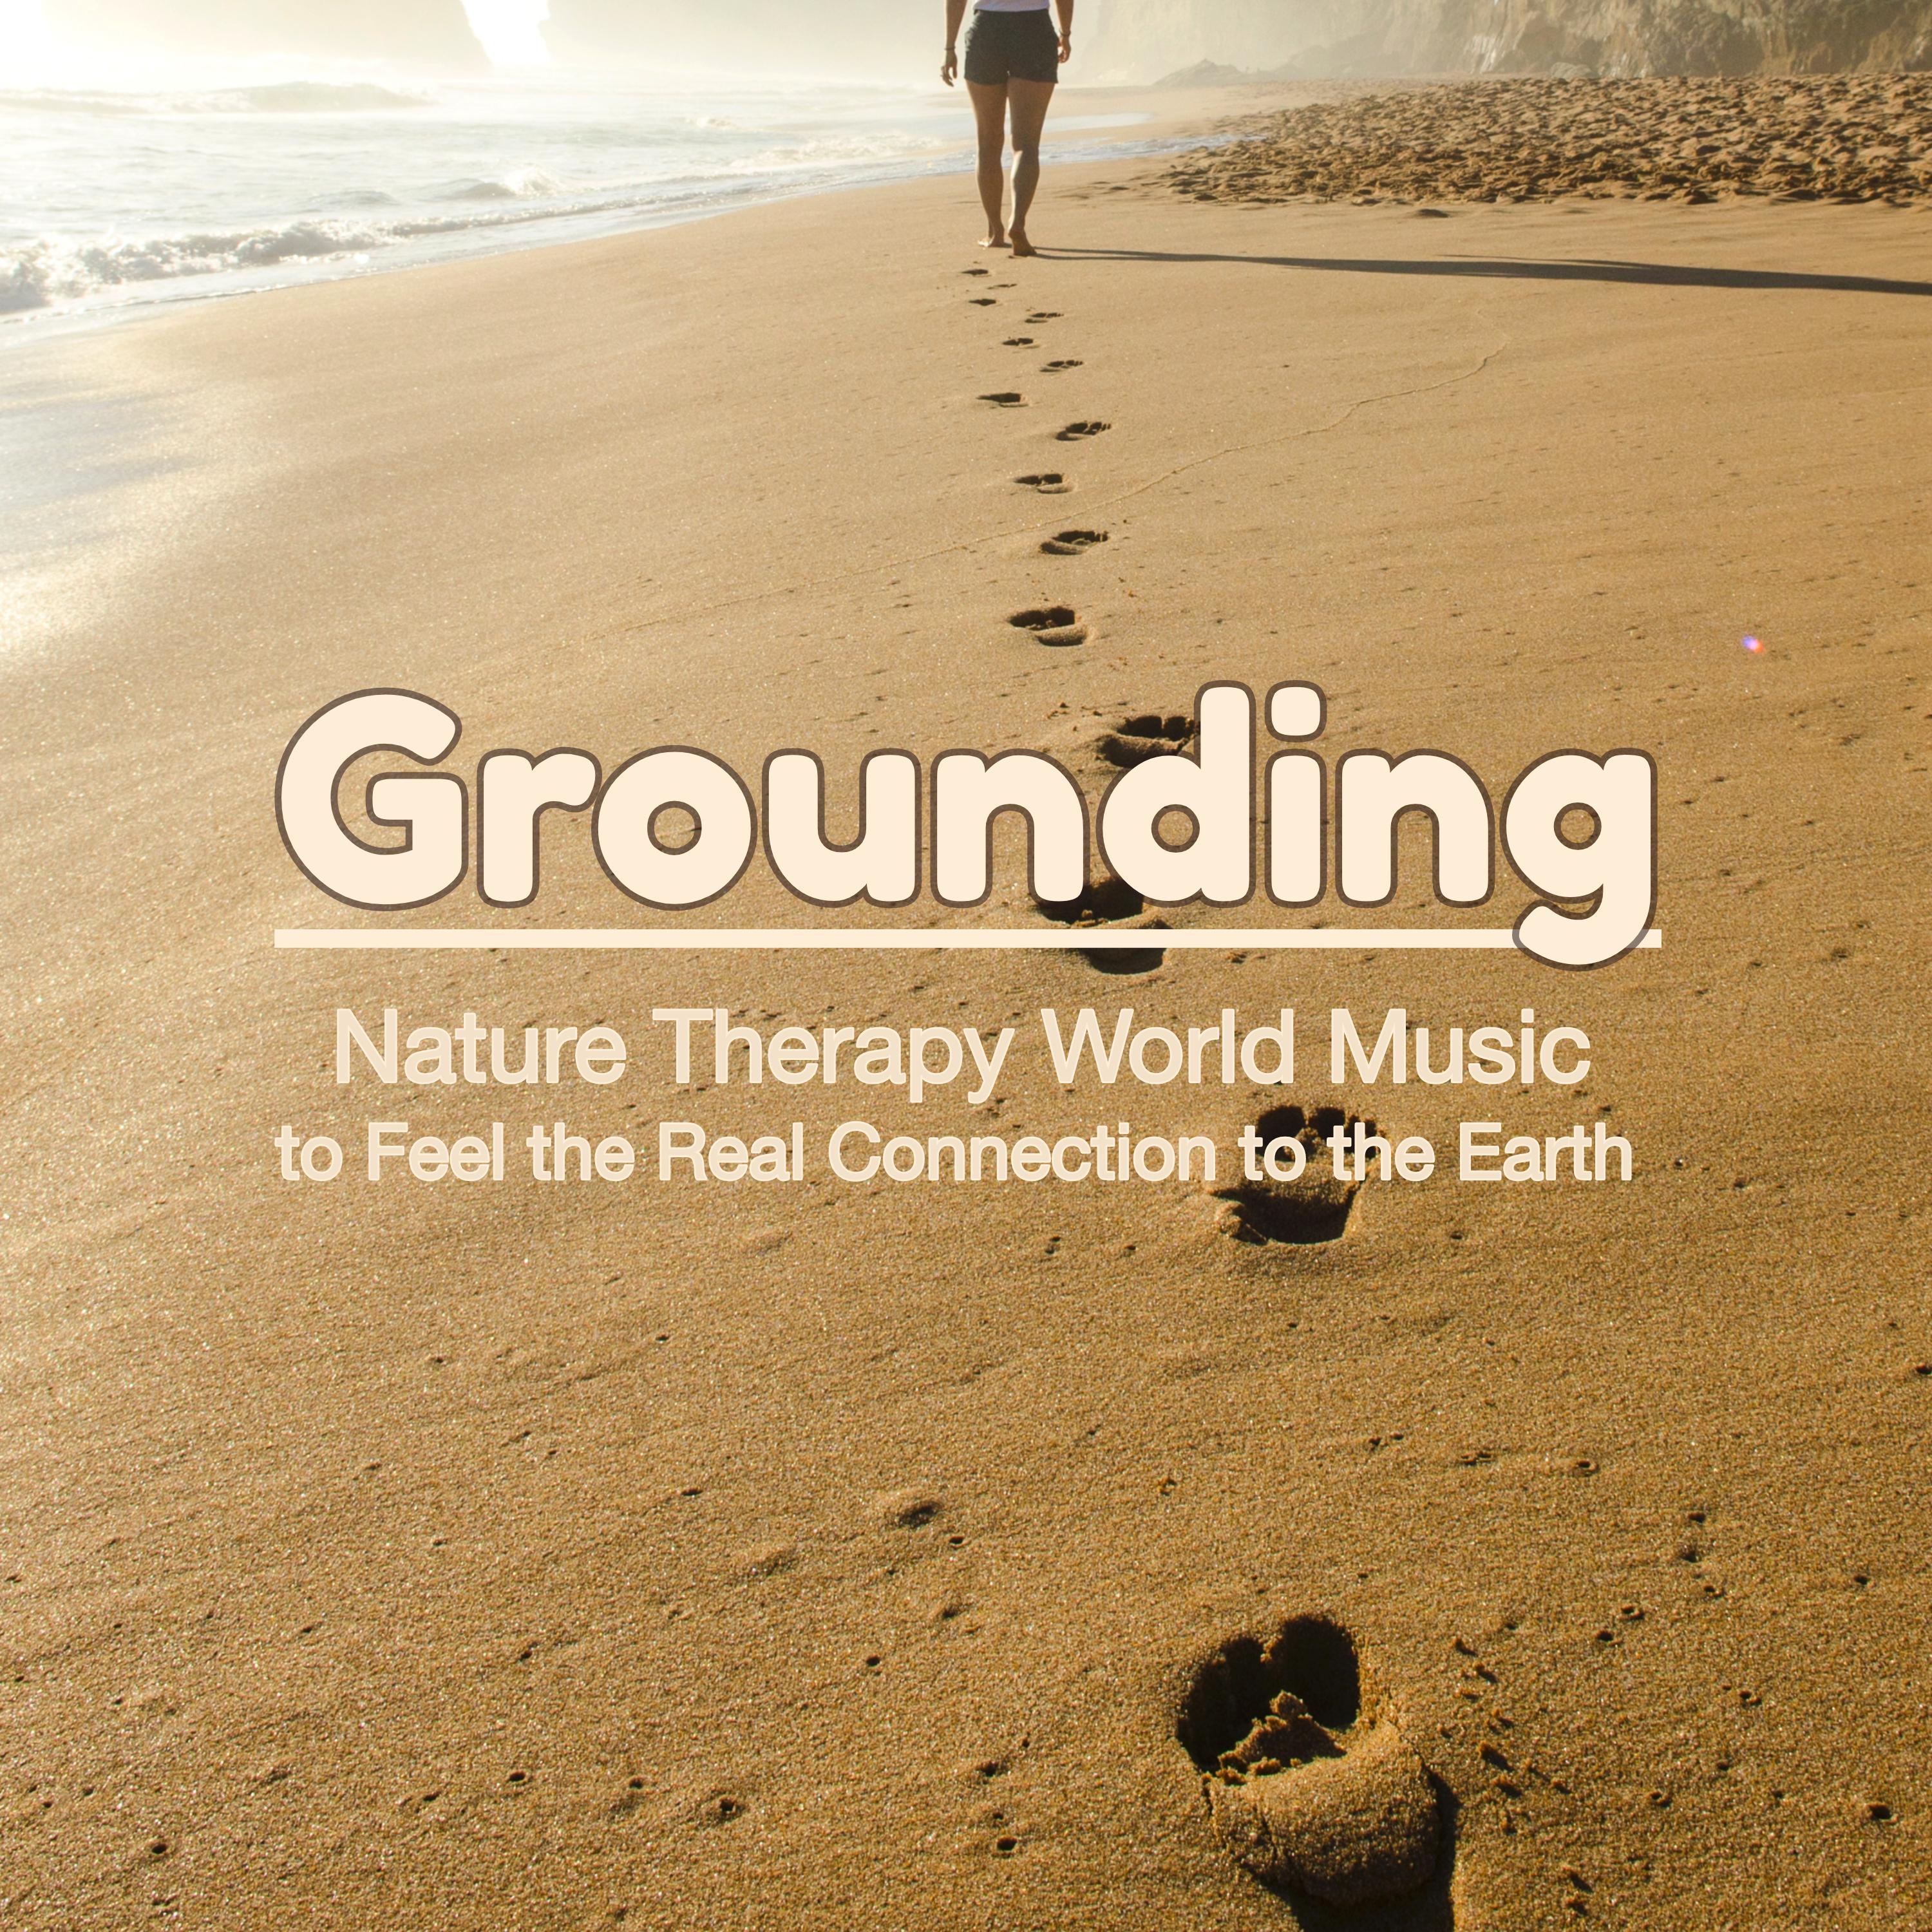 Find Your Ground - Healing Sounds